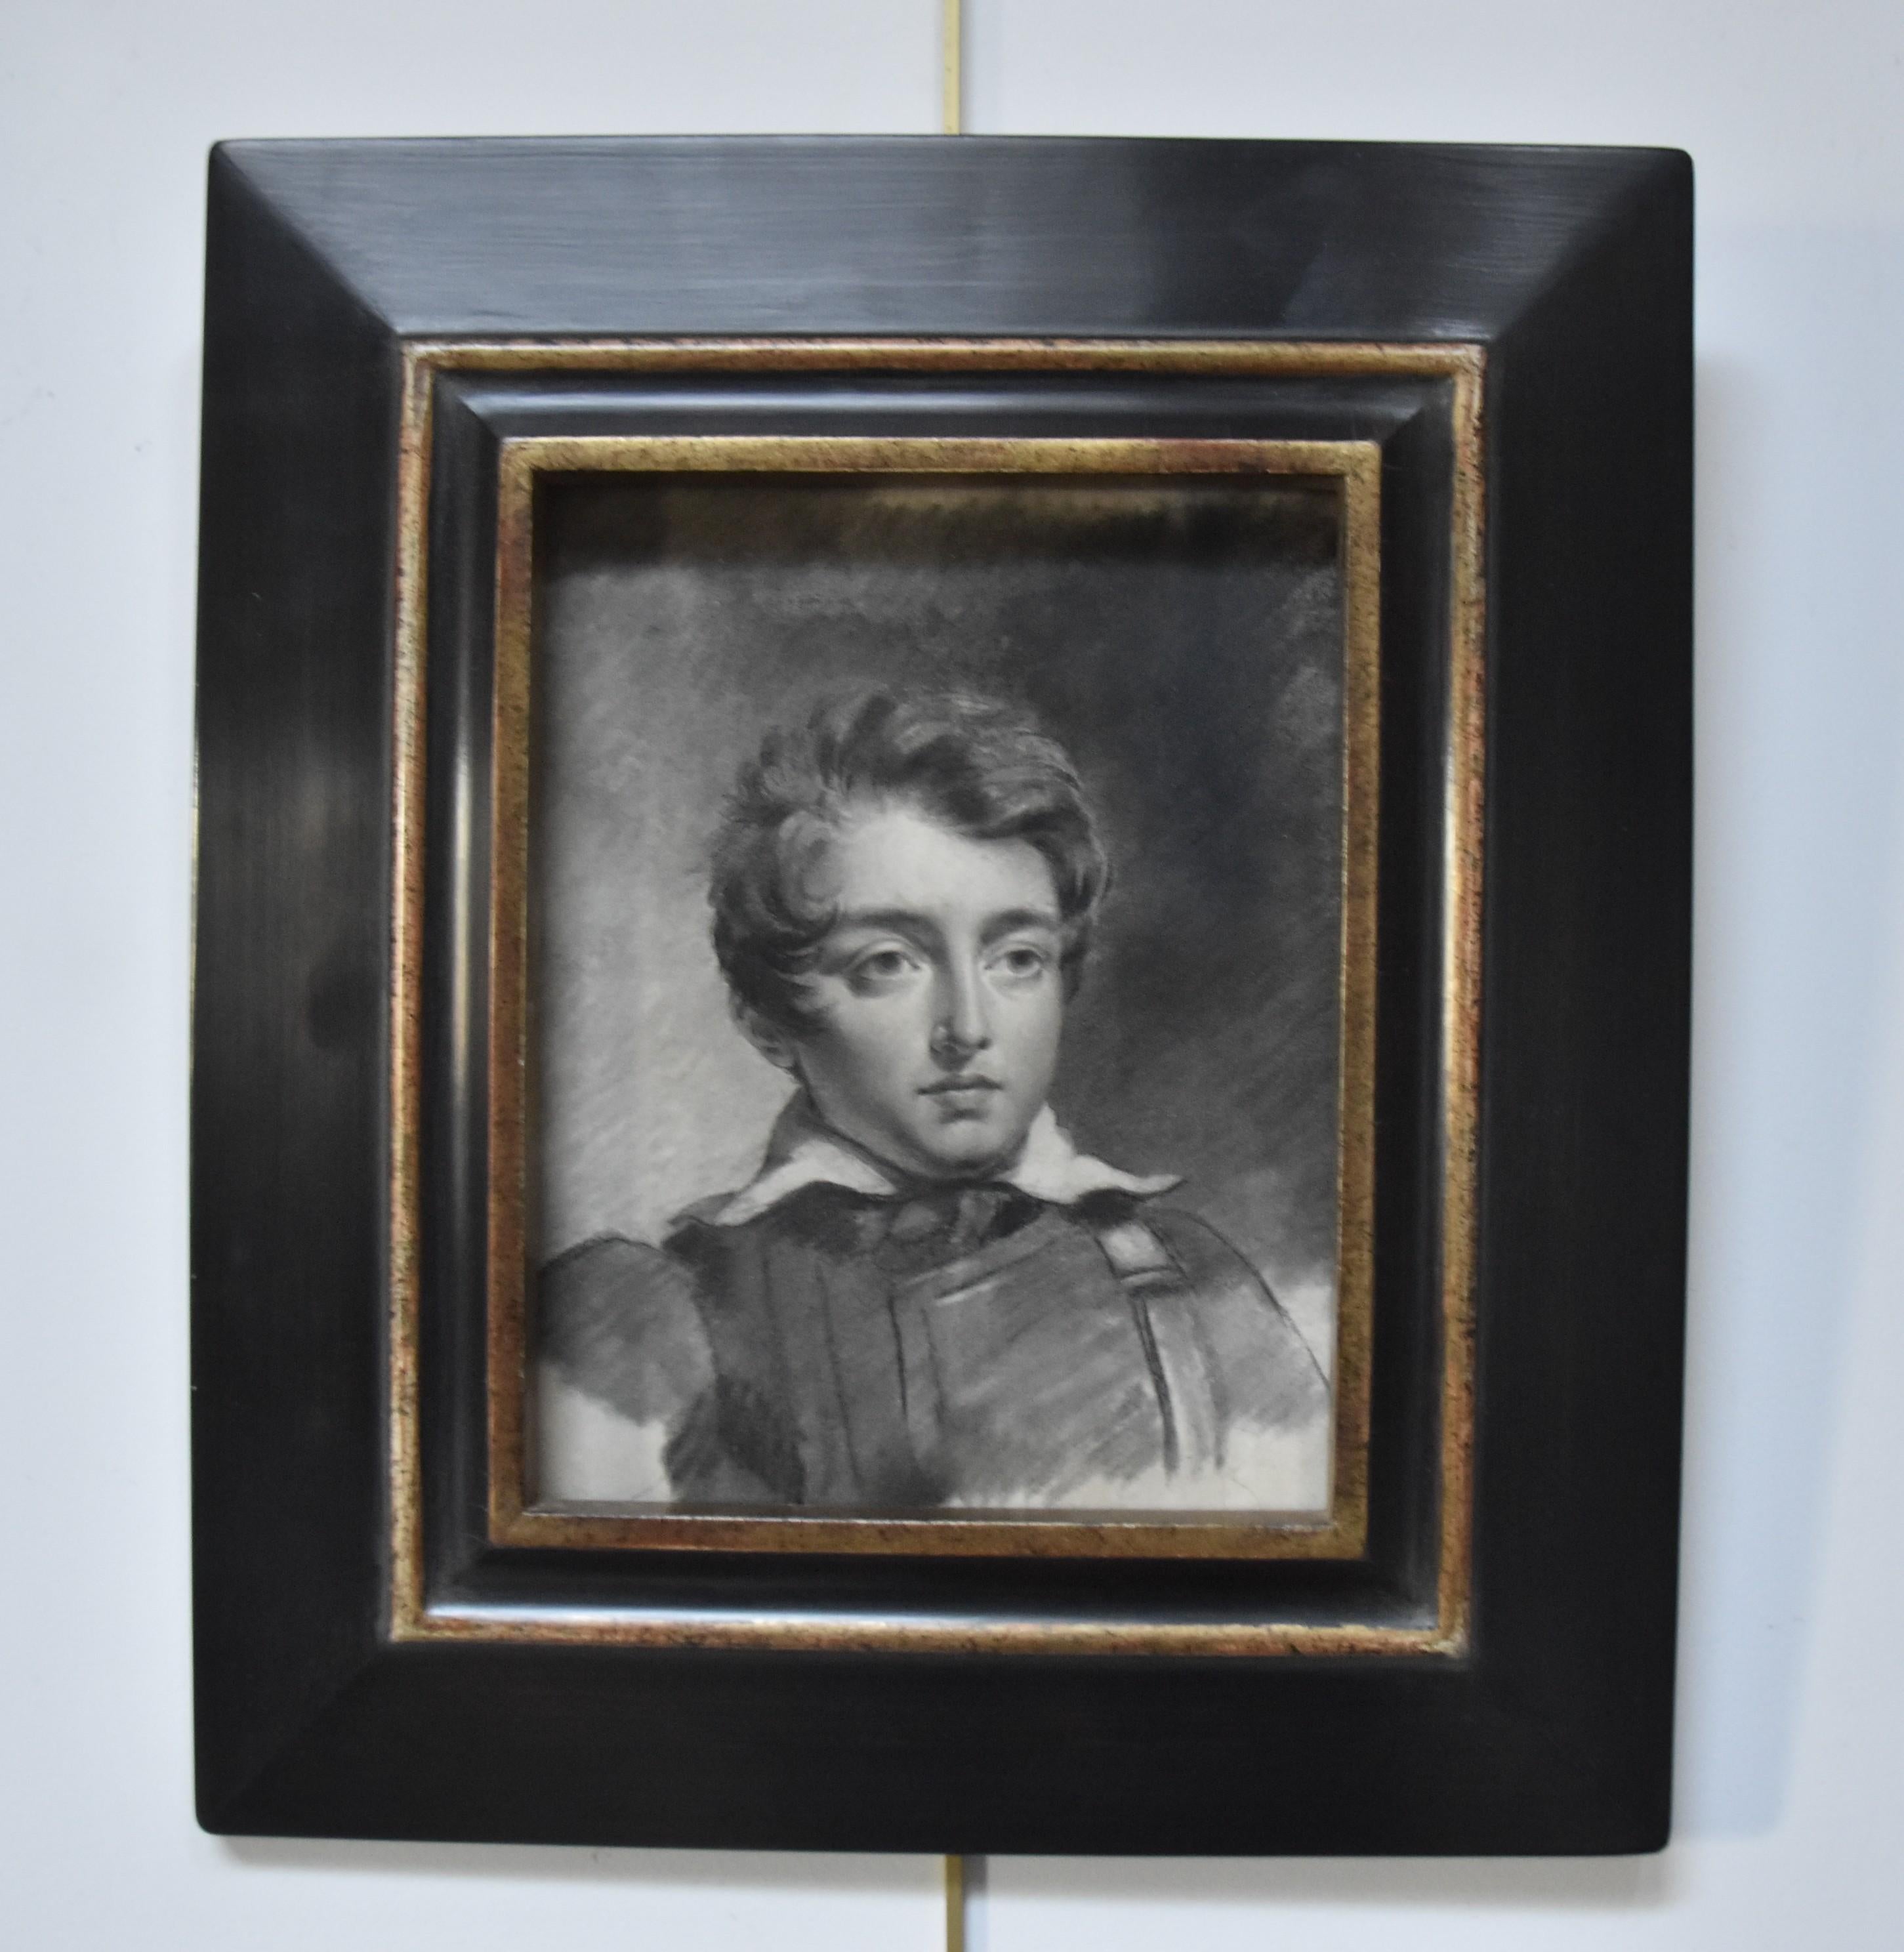 French Romantic school, circa 1840
Portrait of a young man, 
charcoal on paper
22.5 x 17 cm
In good condition, however, there is a restoration of the paper in the upper right-hand quarter, which is barely visible.
Framed : 39 x 34 cm

This fine